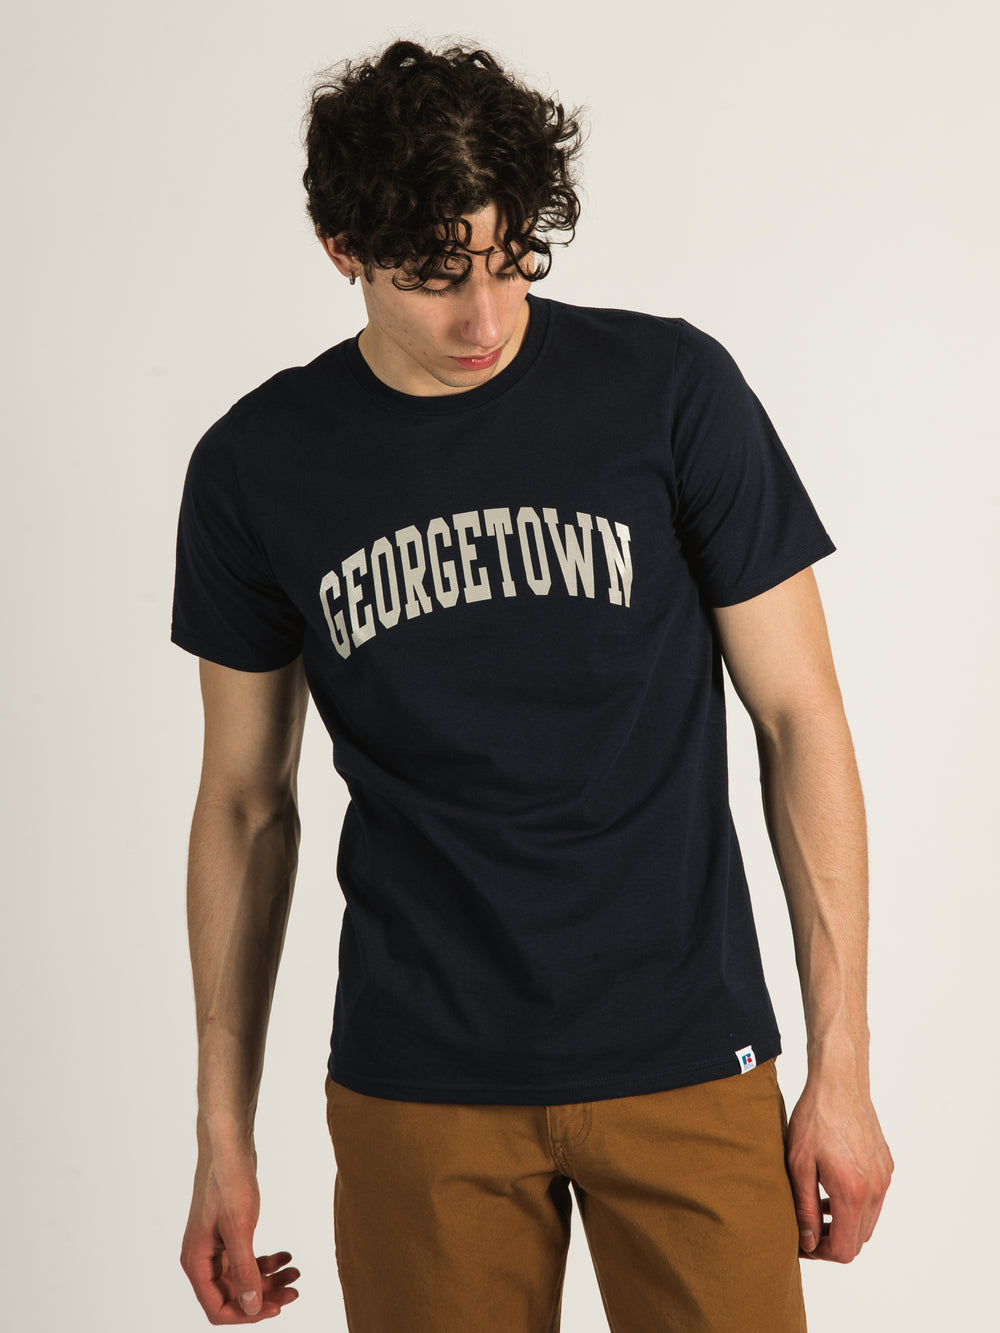 T-SHIRT RUSSELL GEORGETOWN - DÉSTOCKAGE